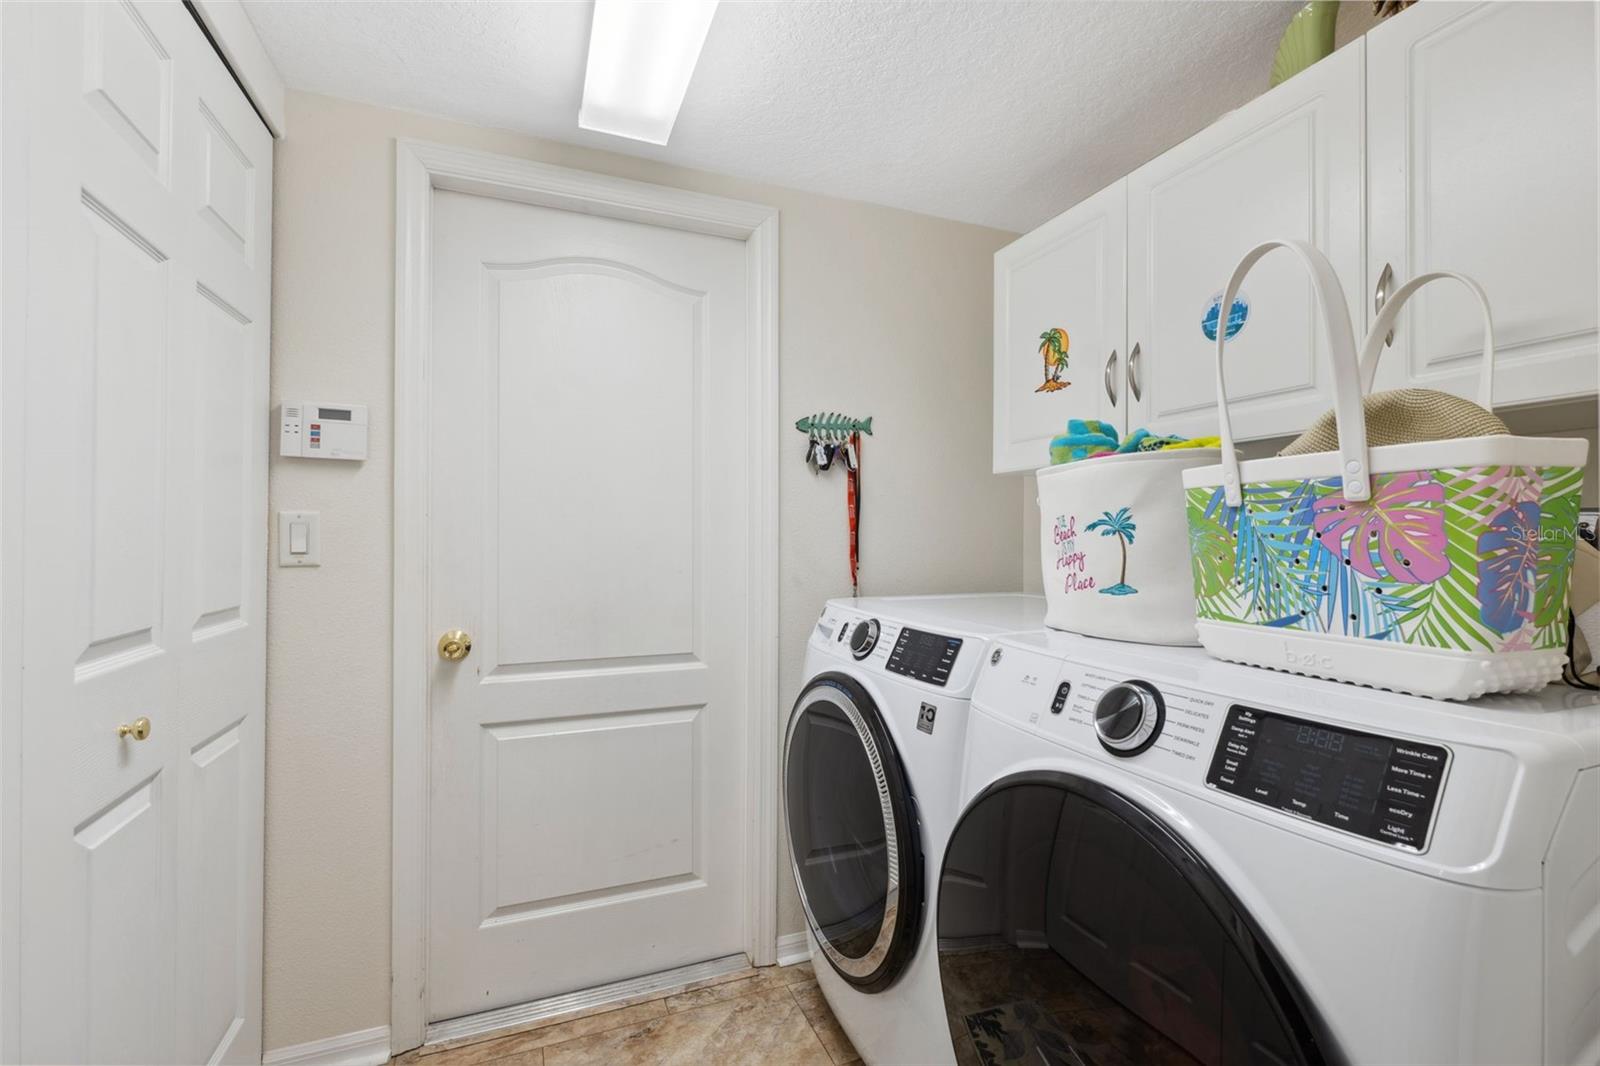 Laundry room with plenty of storage. Off kitchen, leading to garage.